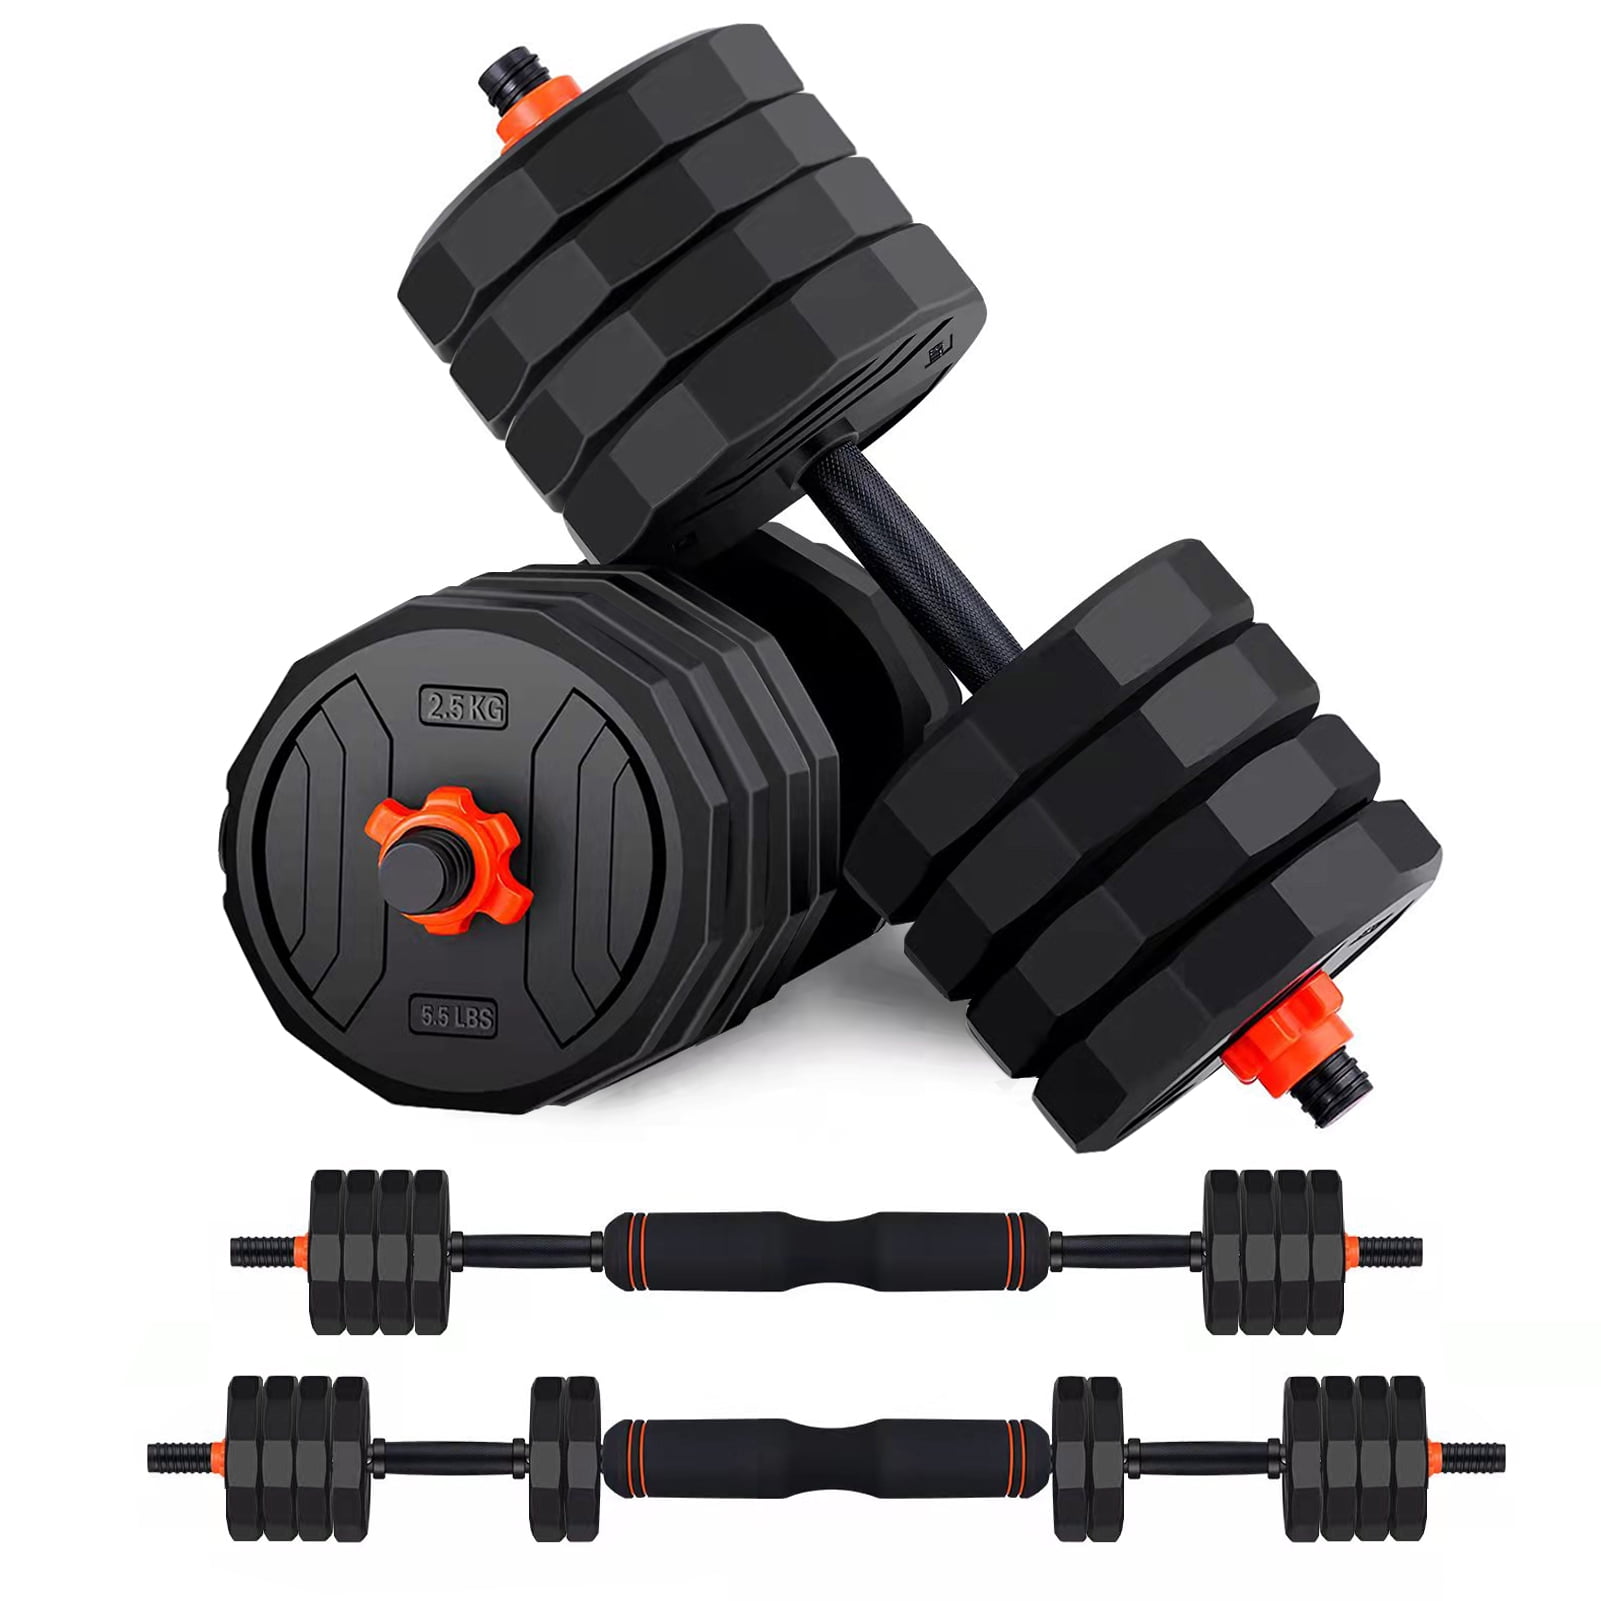 Weight Dumbbell Set 88 LB Adjustable Cap Gym Home Barbell Plates Body Workout US 